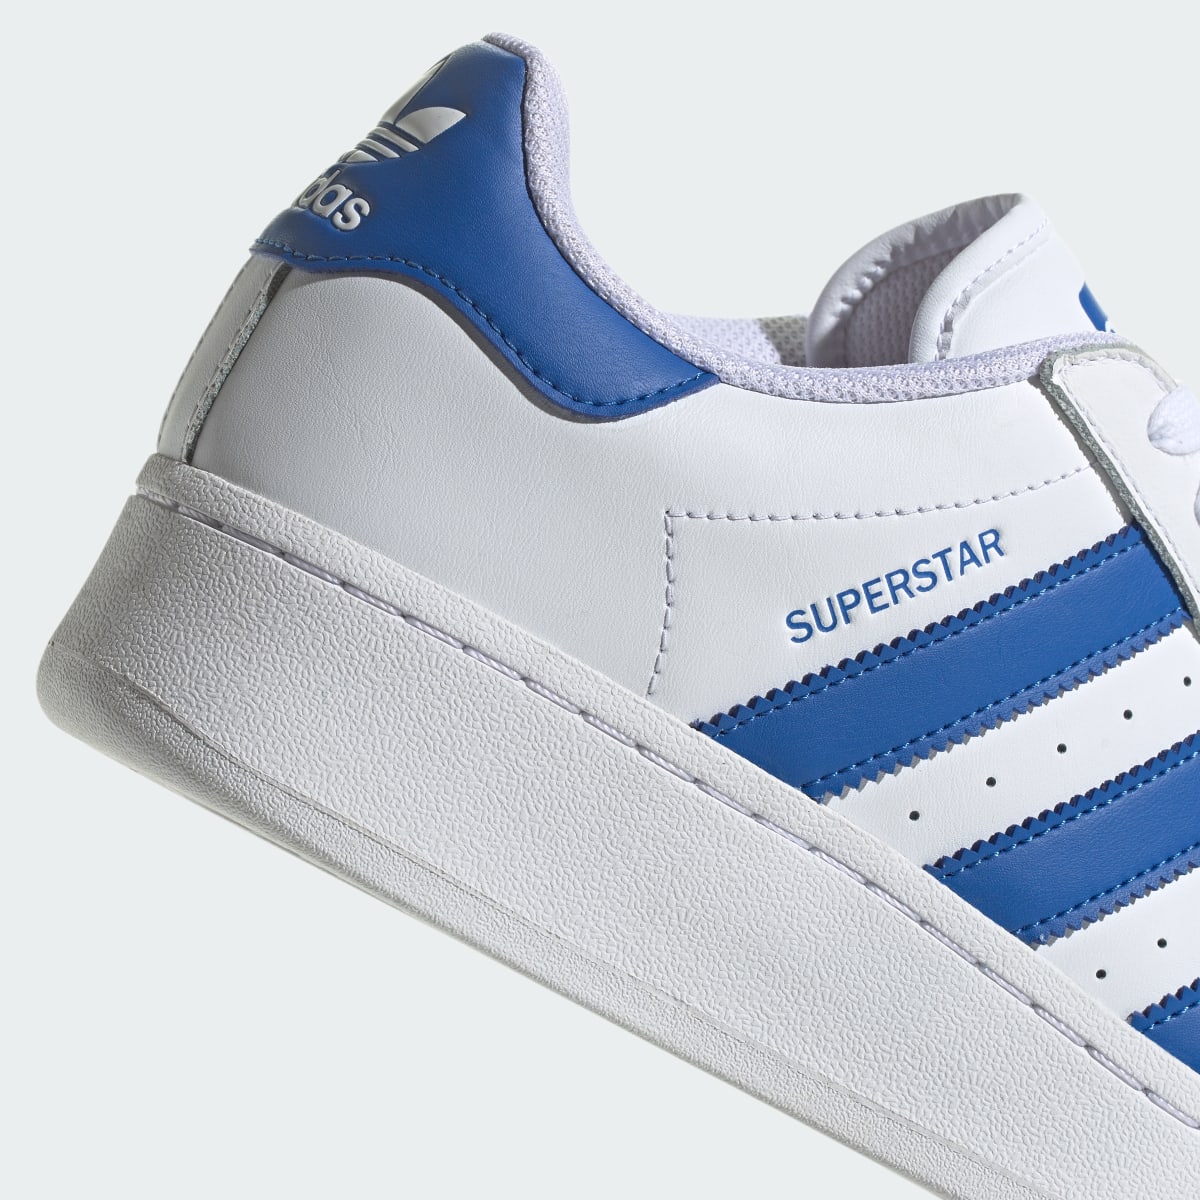 Adidas Superstar XLG Shoes. 10